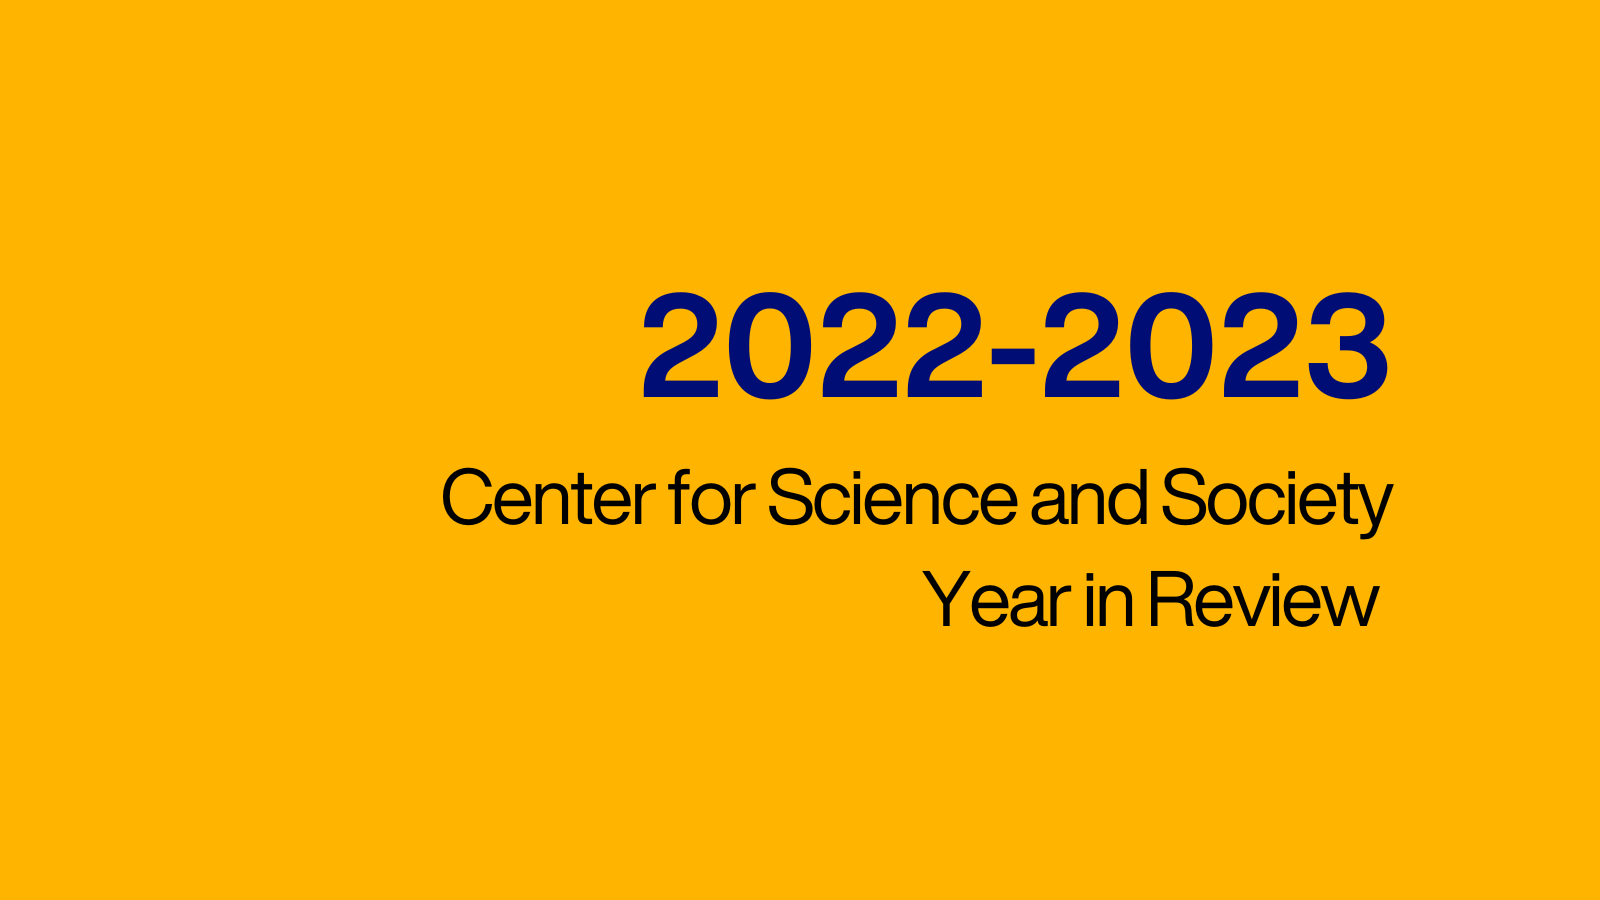 2022-2023 Center for Science and Society Year in Review